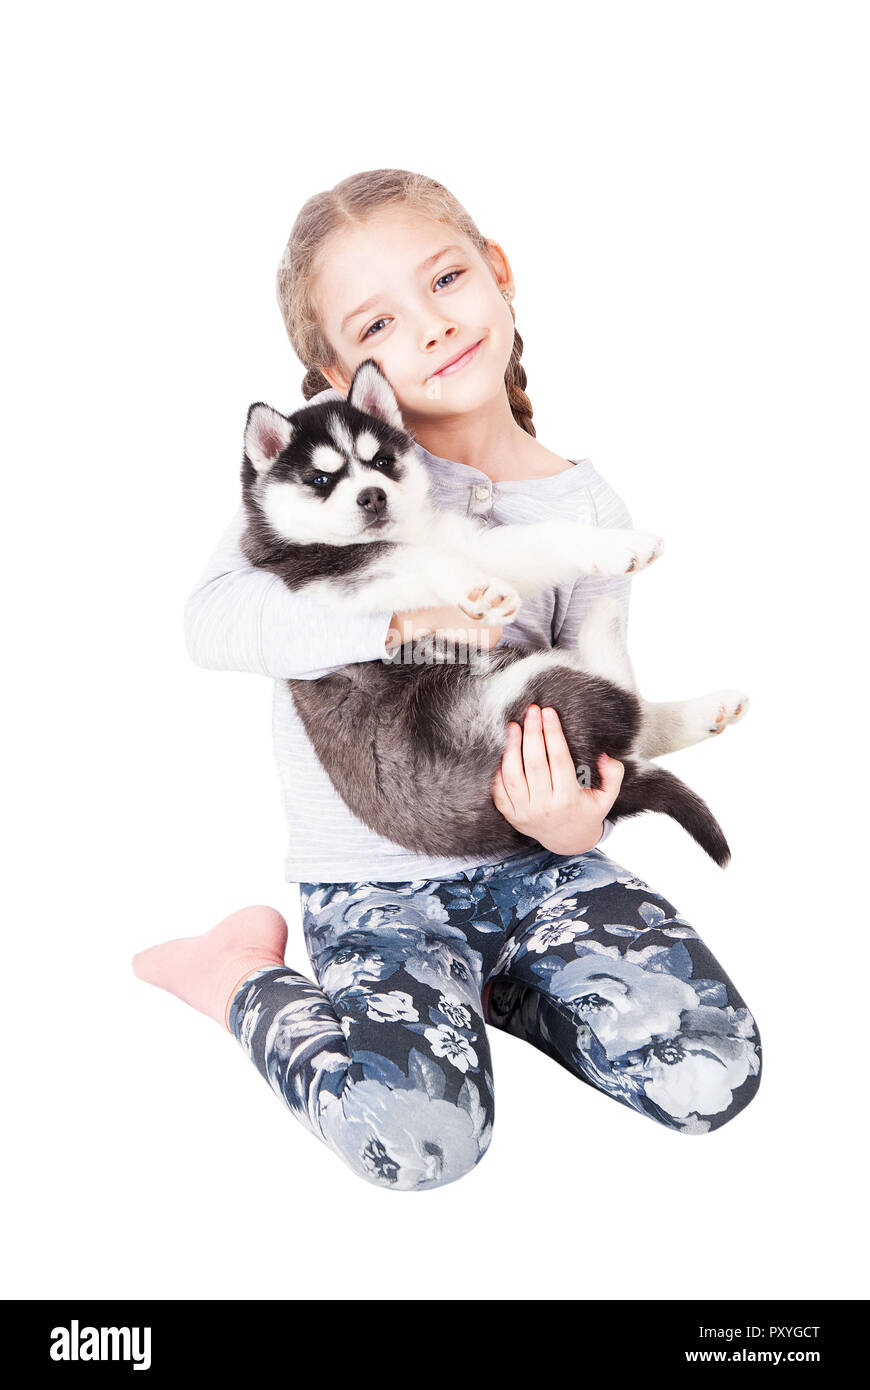 Cute little girl hugging a husky puppy, isolated on a white background. Stock Photo